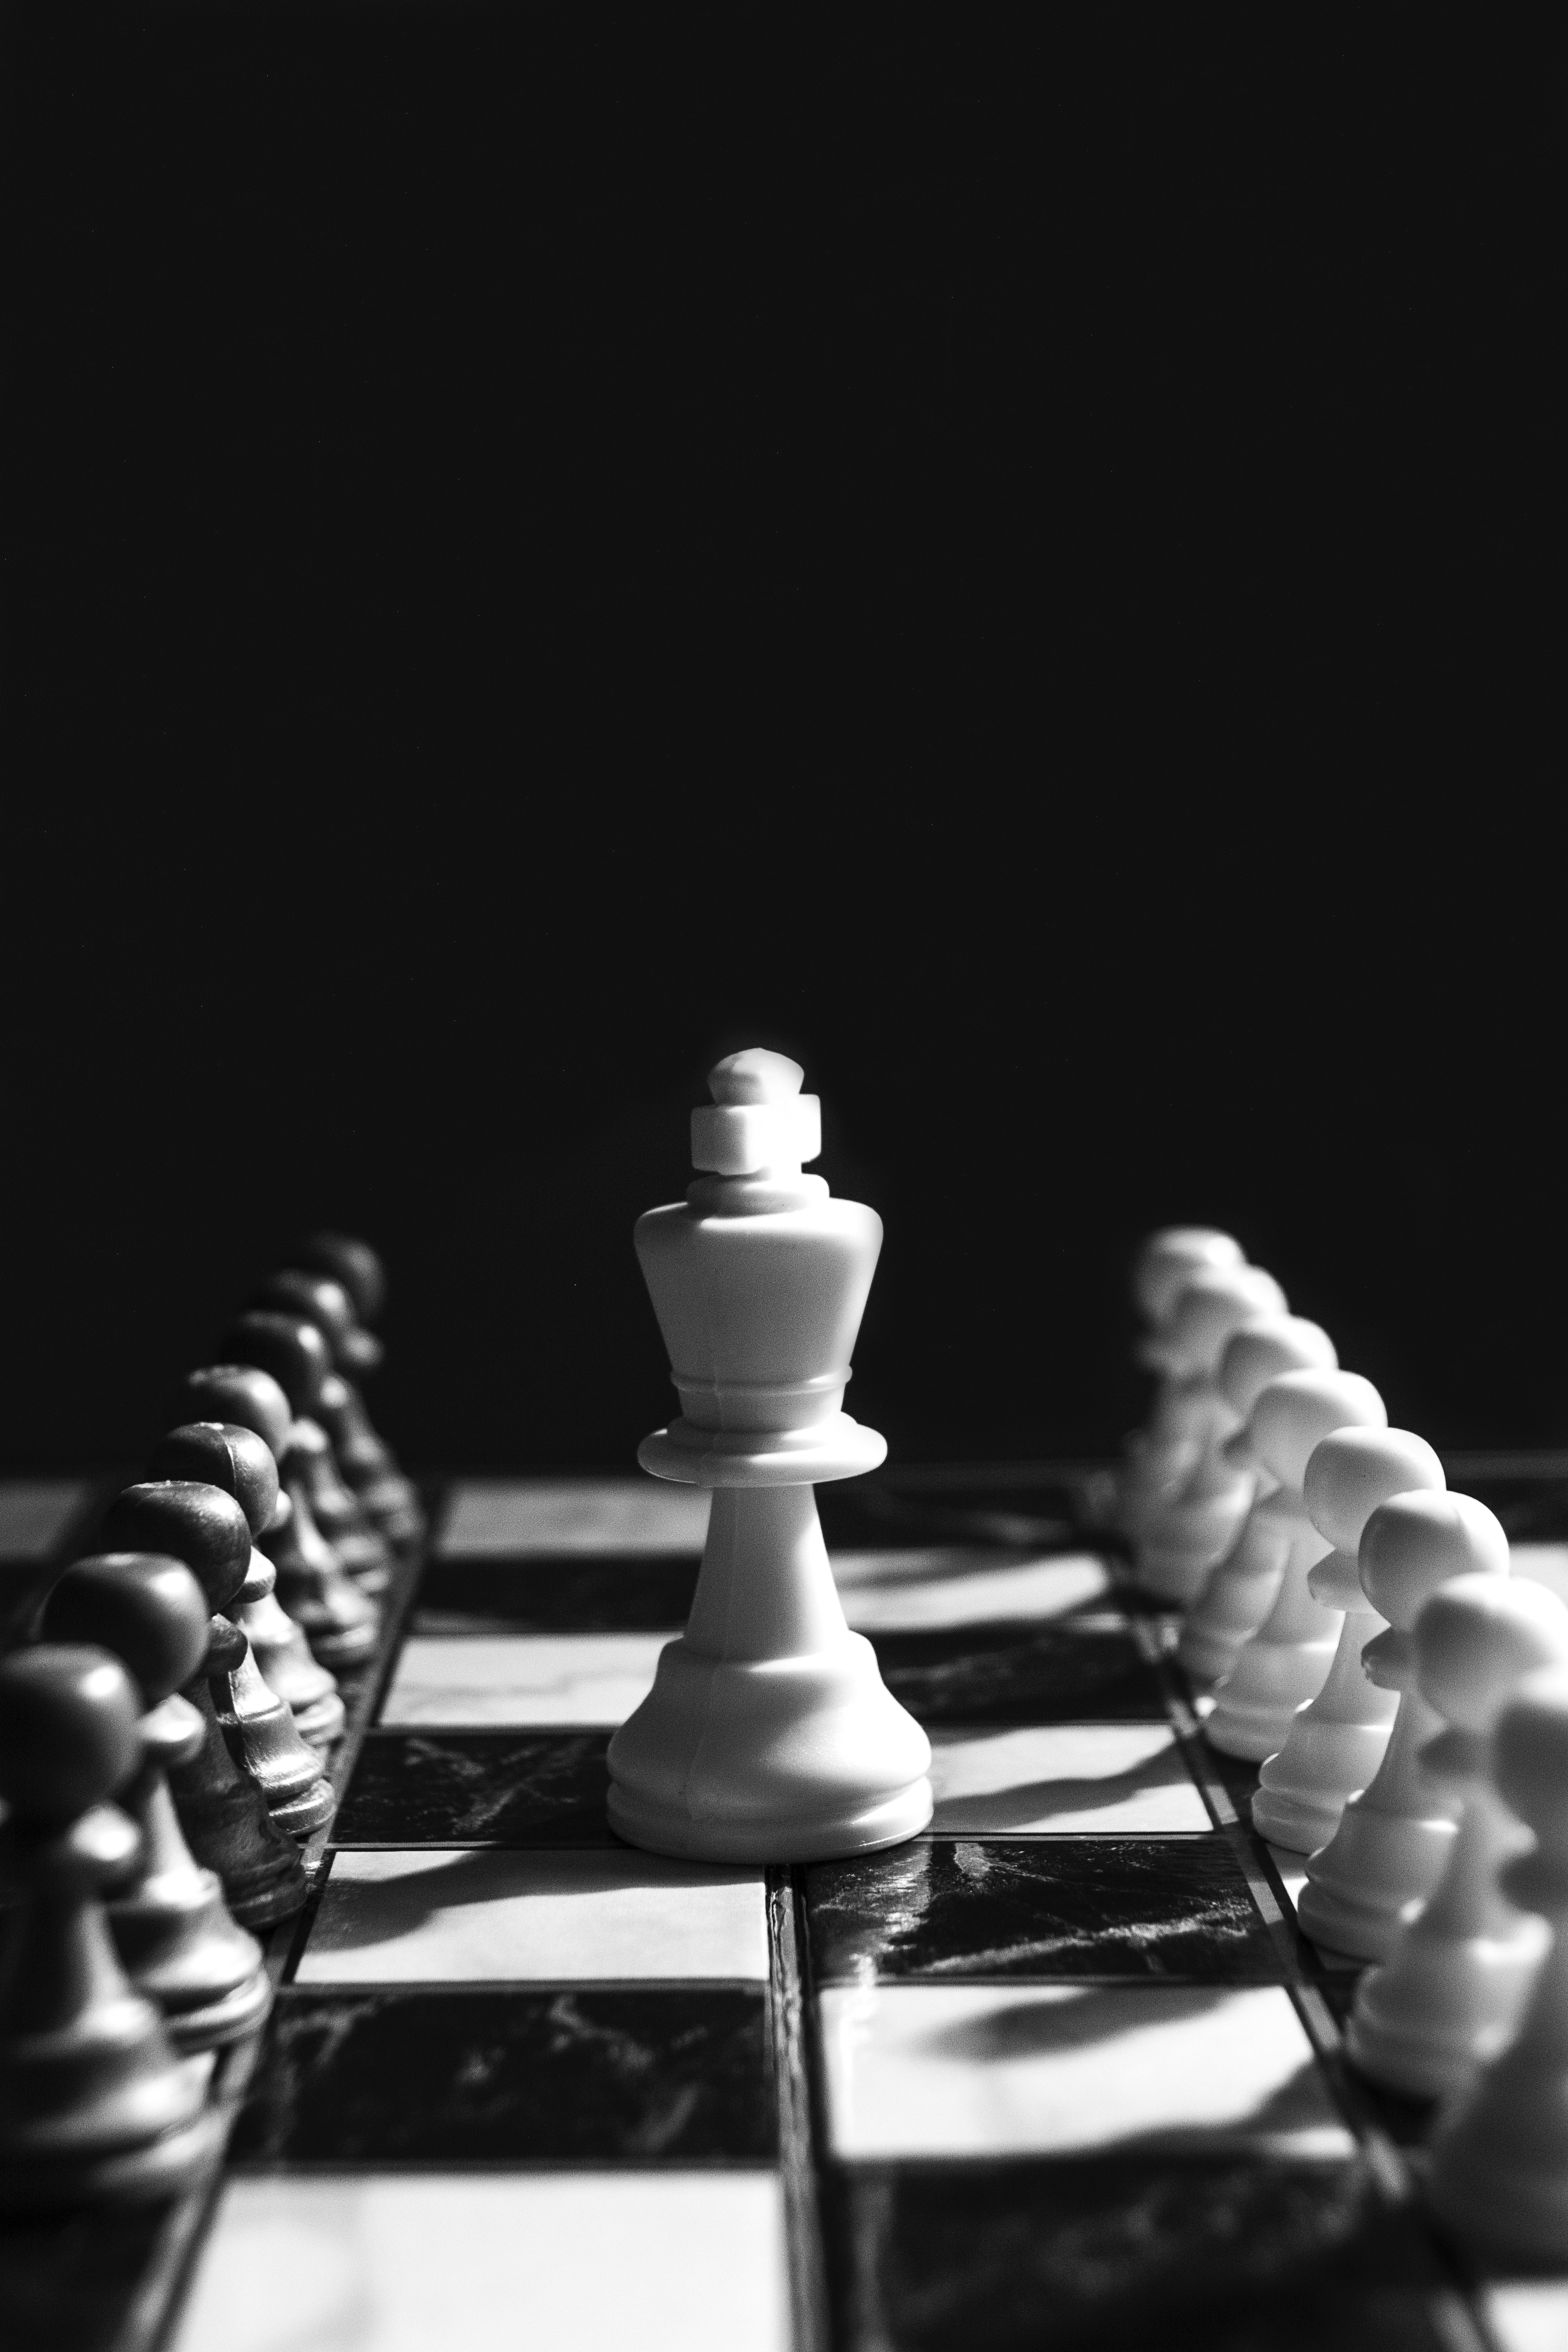 King figure in on a chess board while two lines of pawns on right and left.
5 Proven Ways to Lead with Charisma and Make Influence on Others